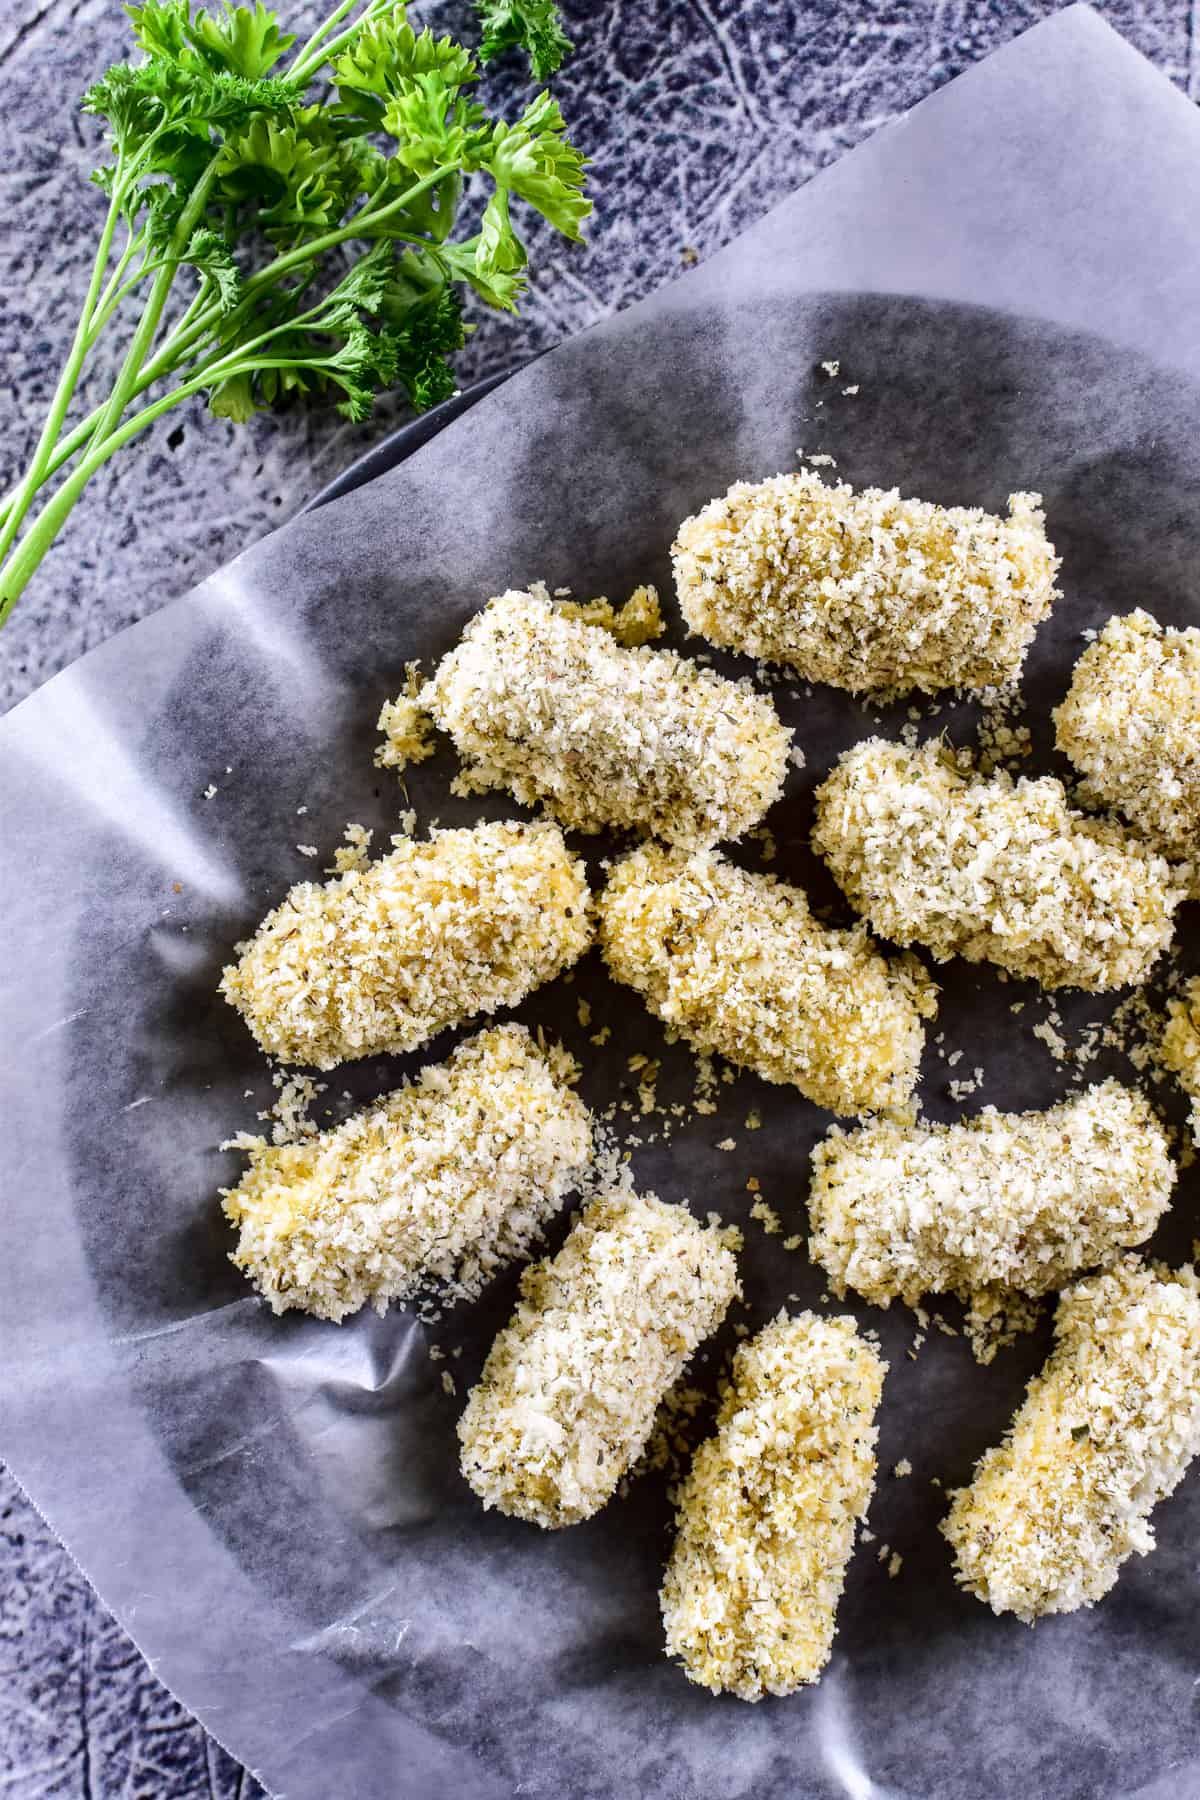 Coated Mozzarella Sticks ready for the air fryer